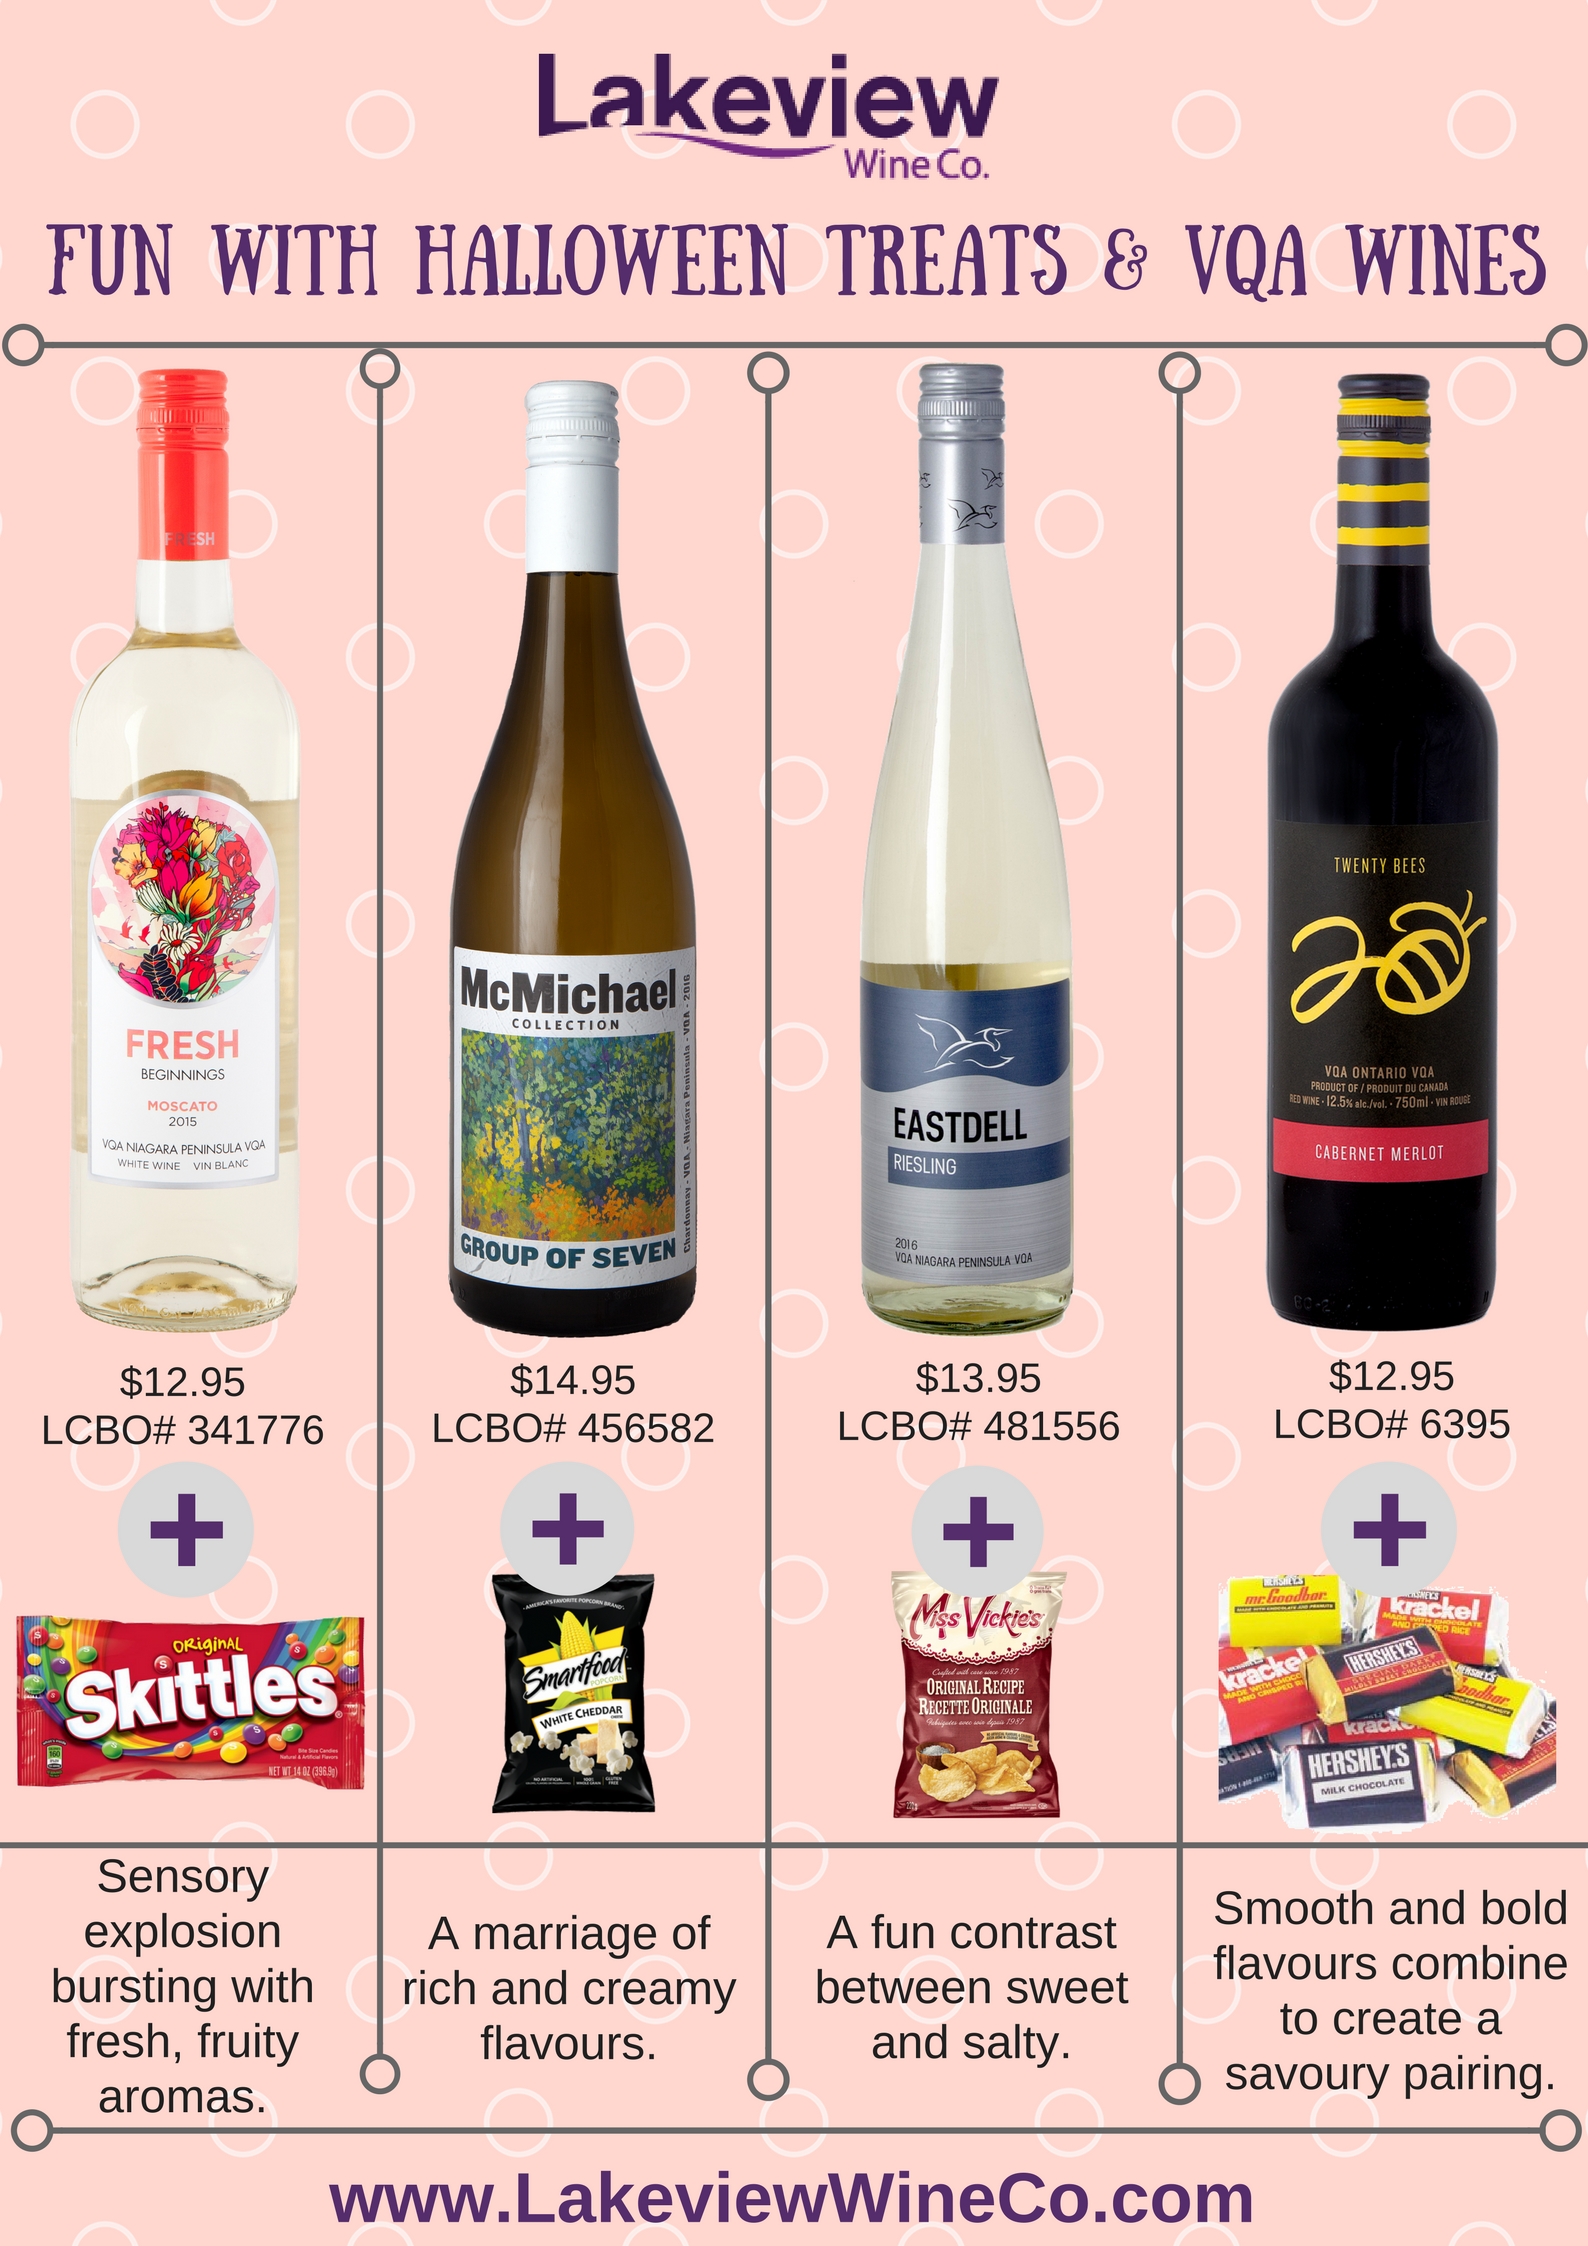 Wine & candy pairings, niagara, lakeview wine co.